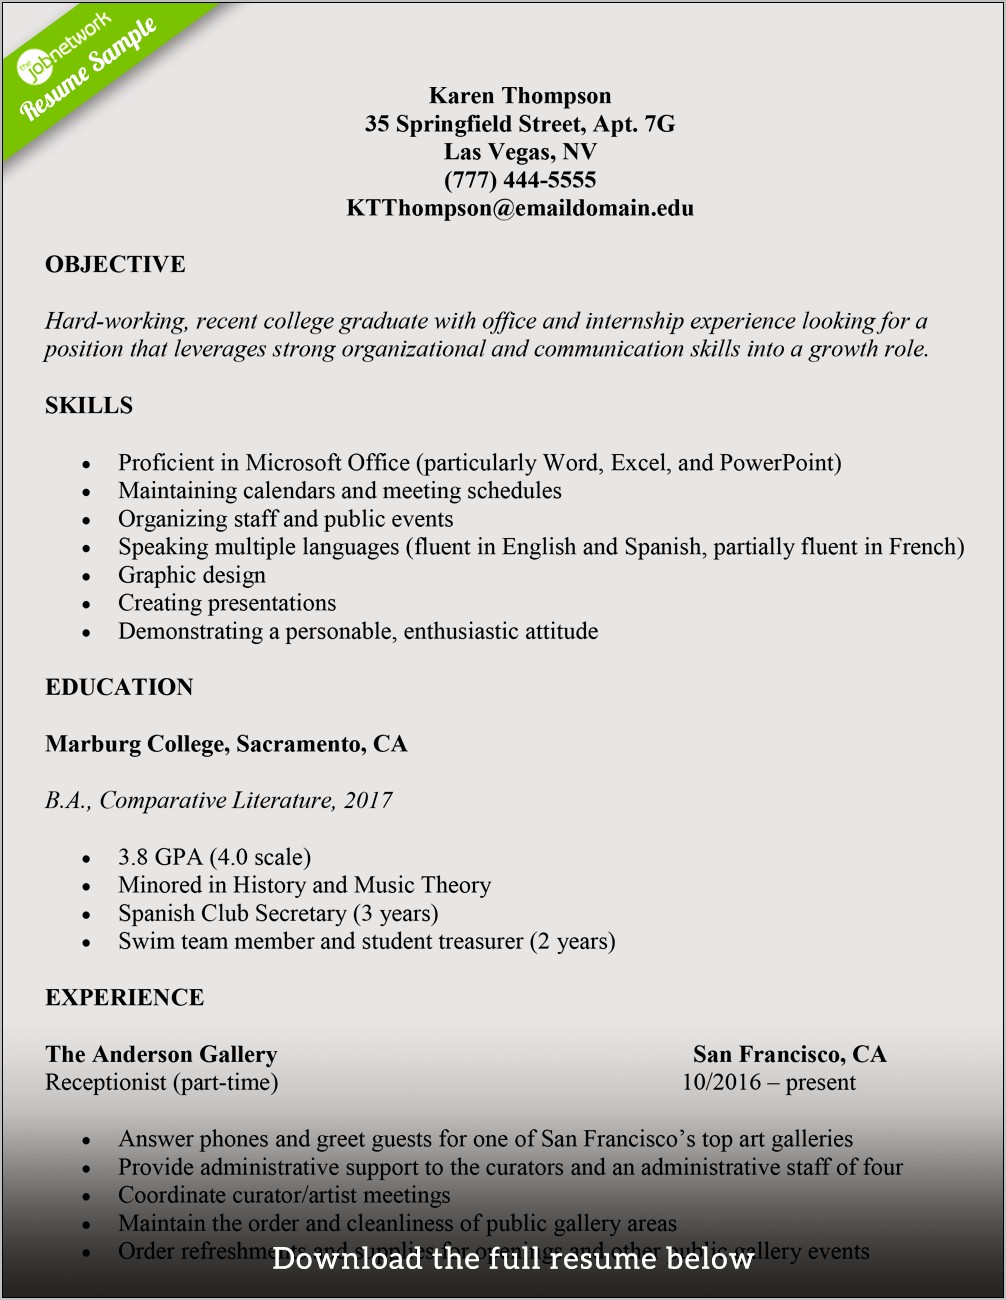 Skills Learned In College For Resume